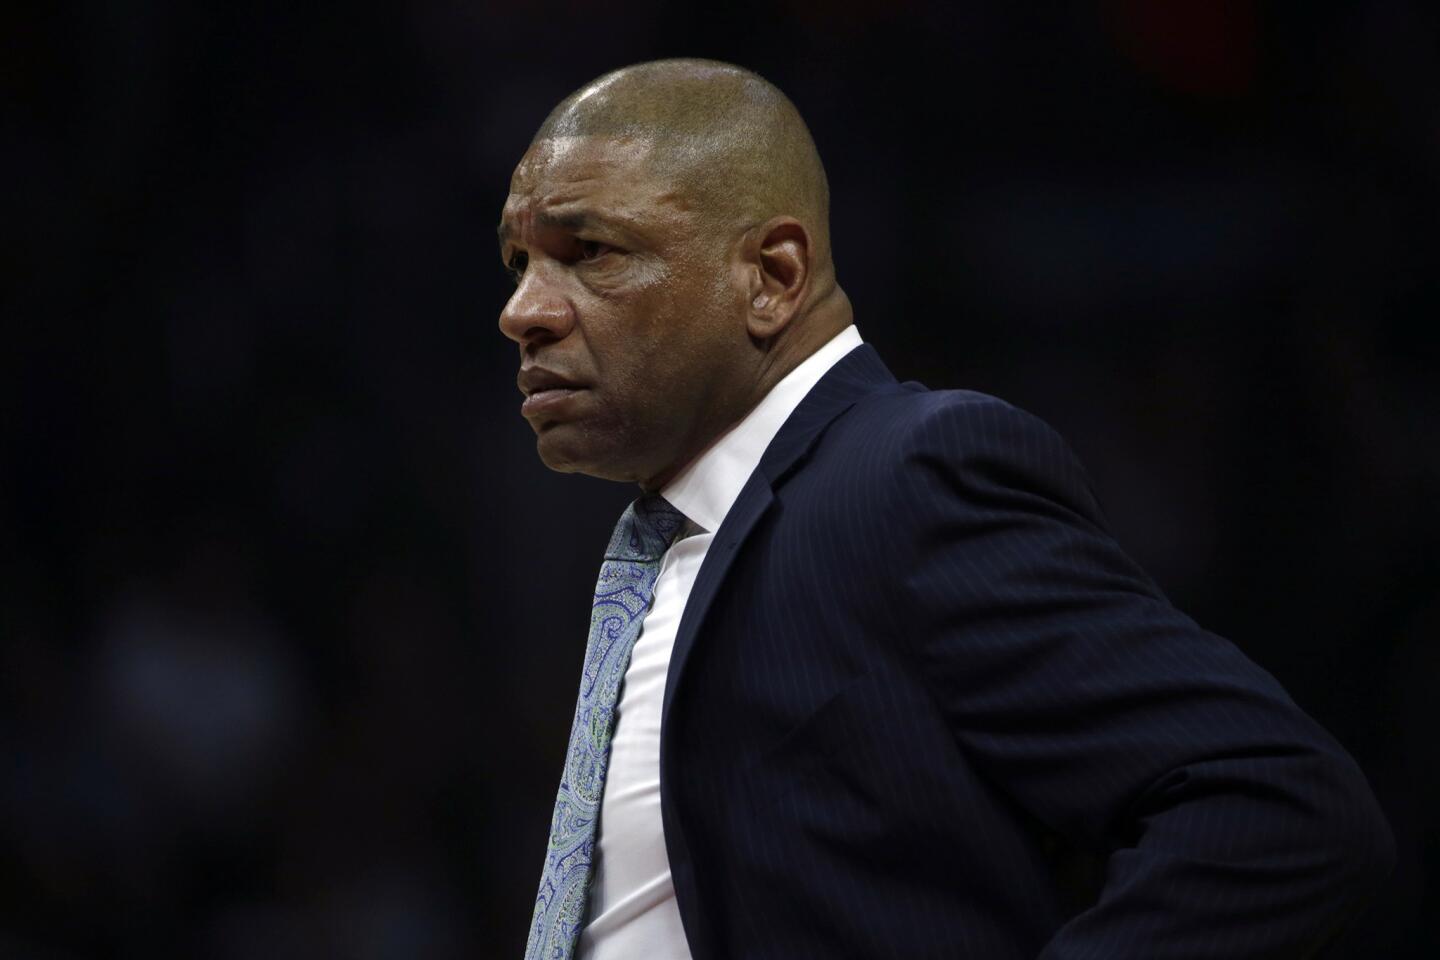 Clippers Coach Doc Rivers looks on during a game against the Denver Nuggets at Staples Center on Wednesday.